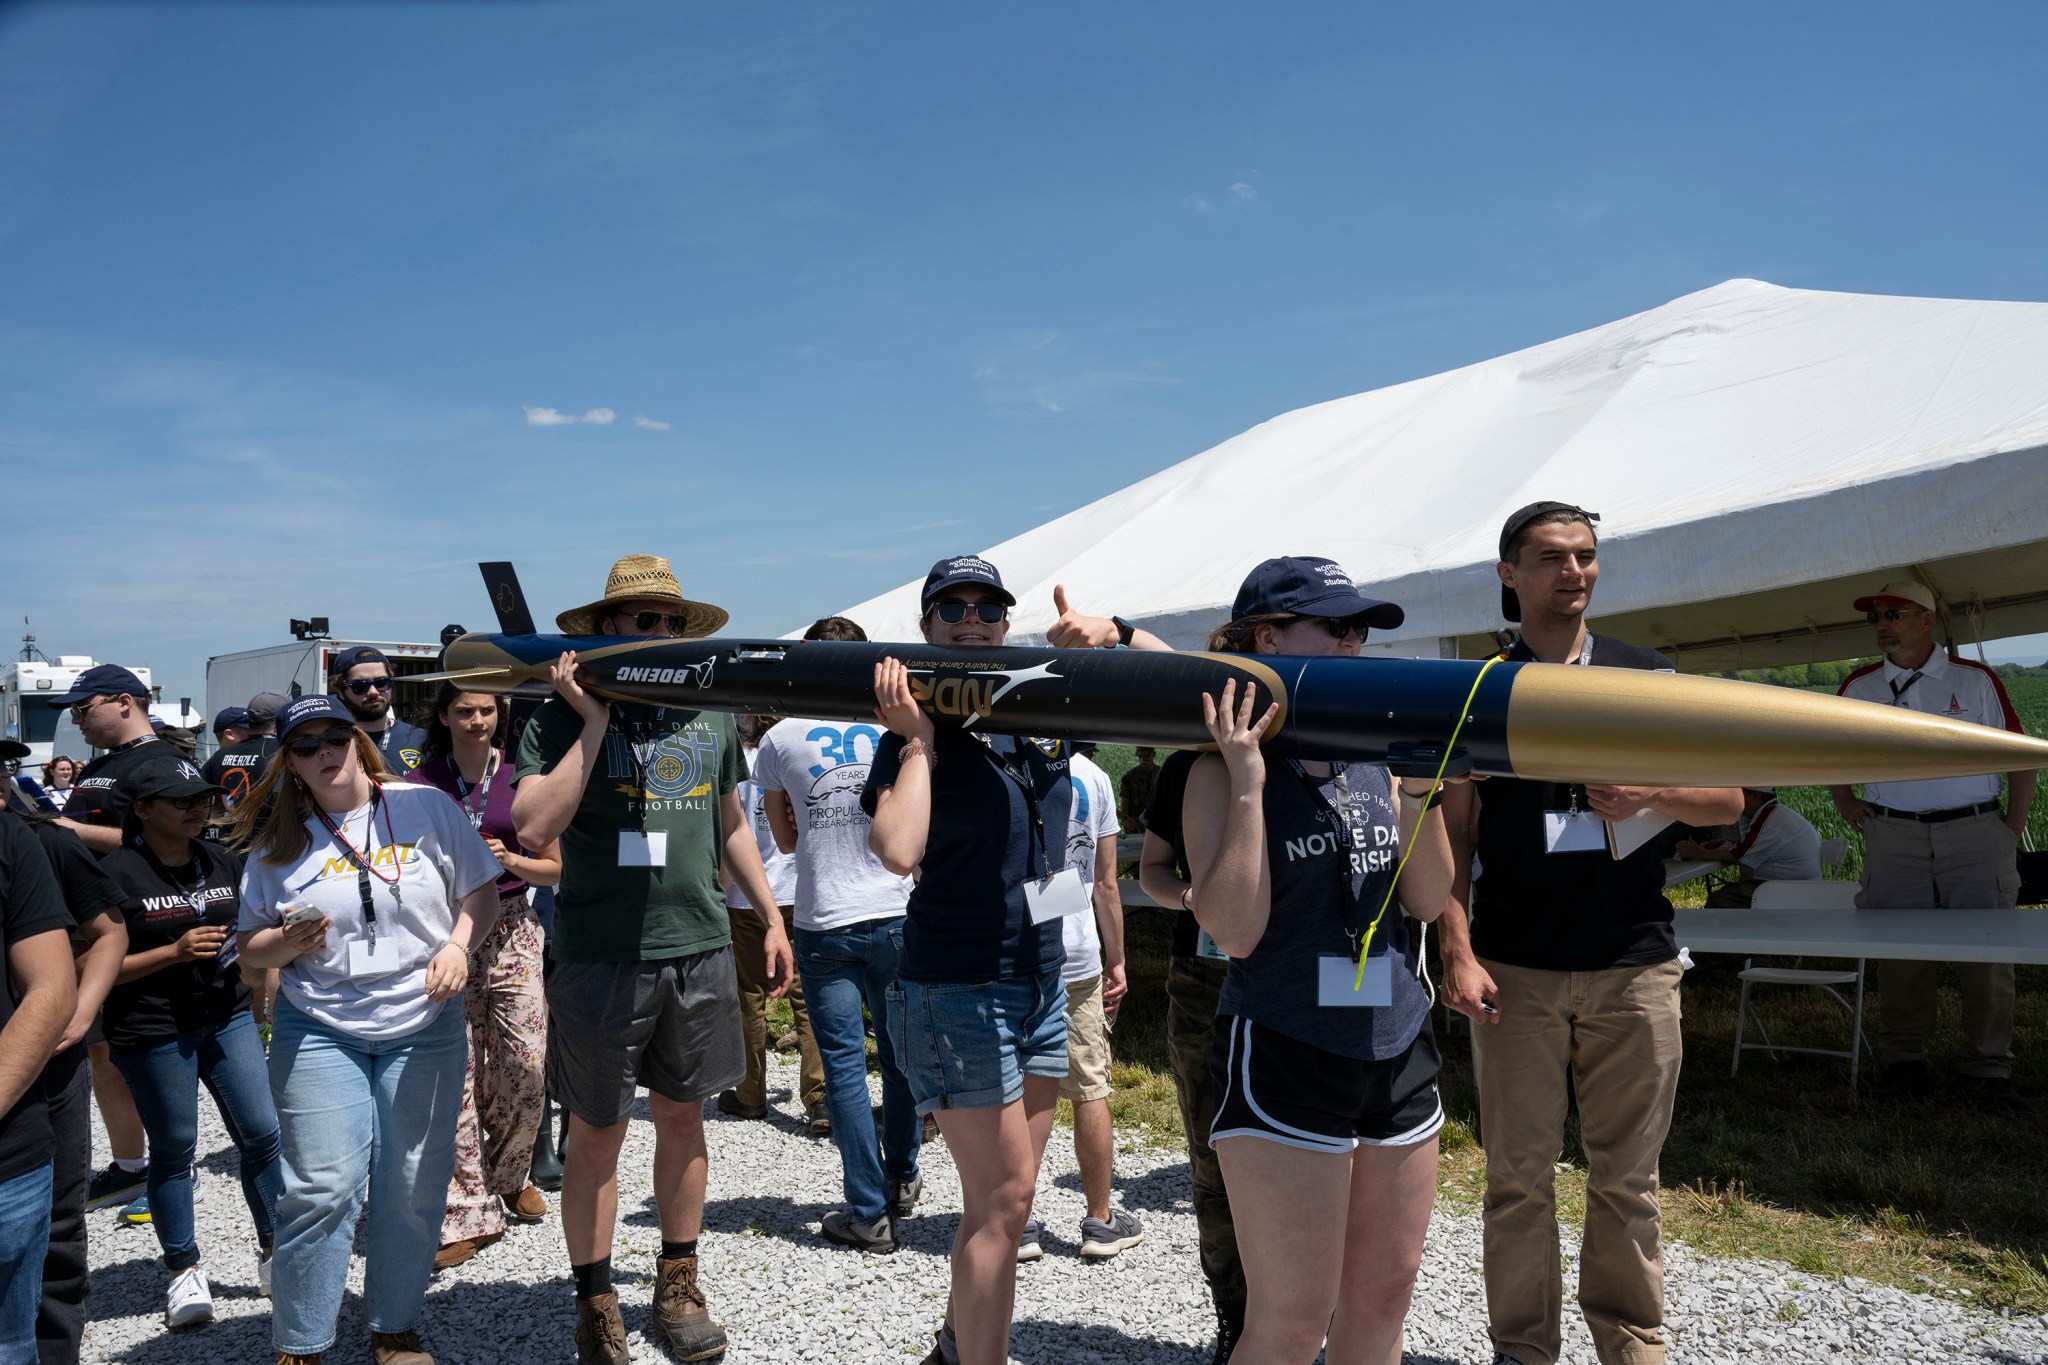 The University of Notre Dame team carries their rocket to the launch pad during the 2022 NASA Student Launch competition April 23.